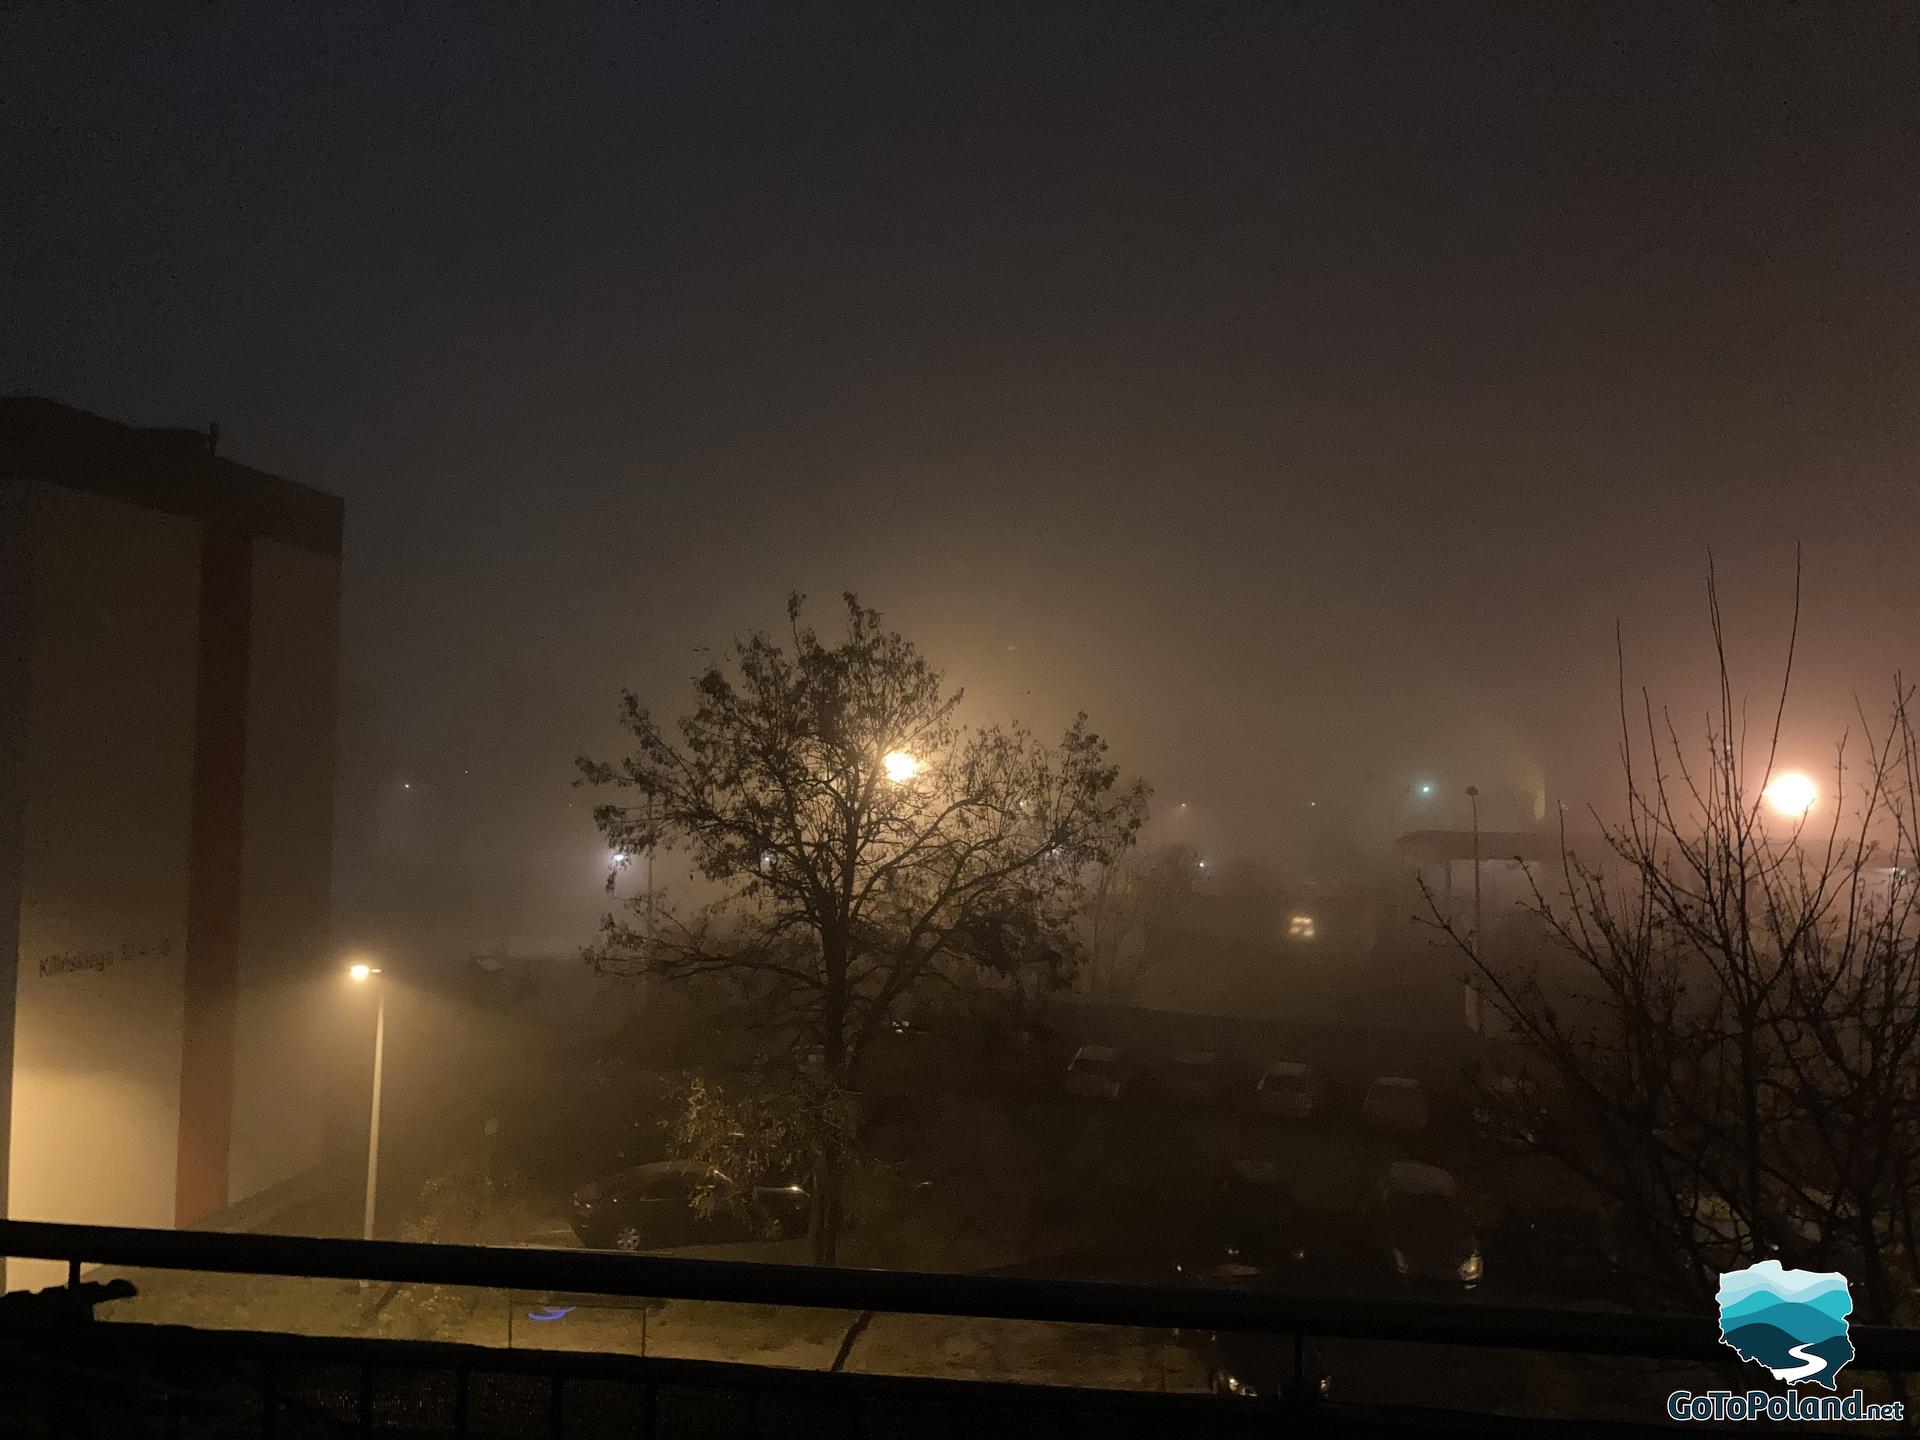 A fog in a town at night, blocks of flats in the background 